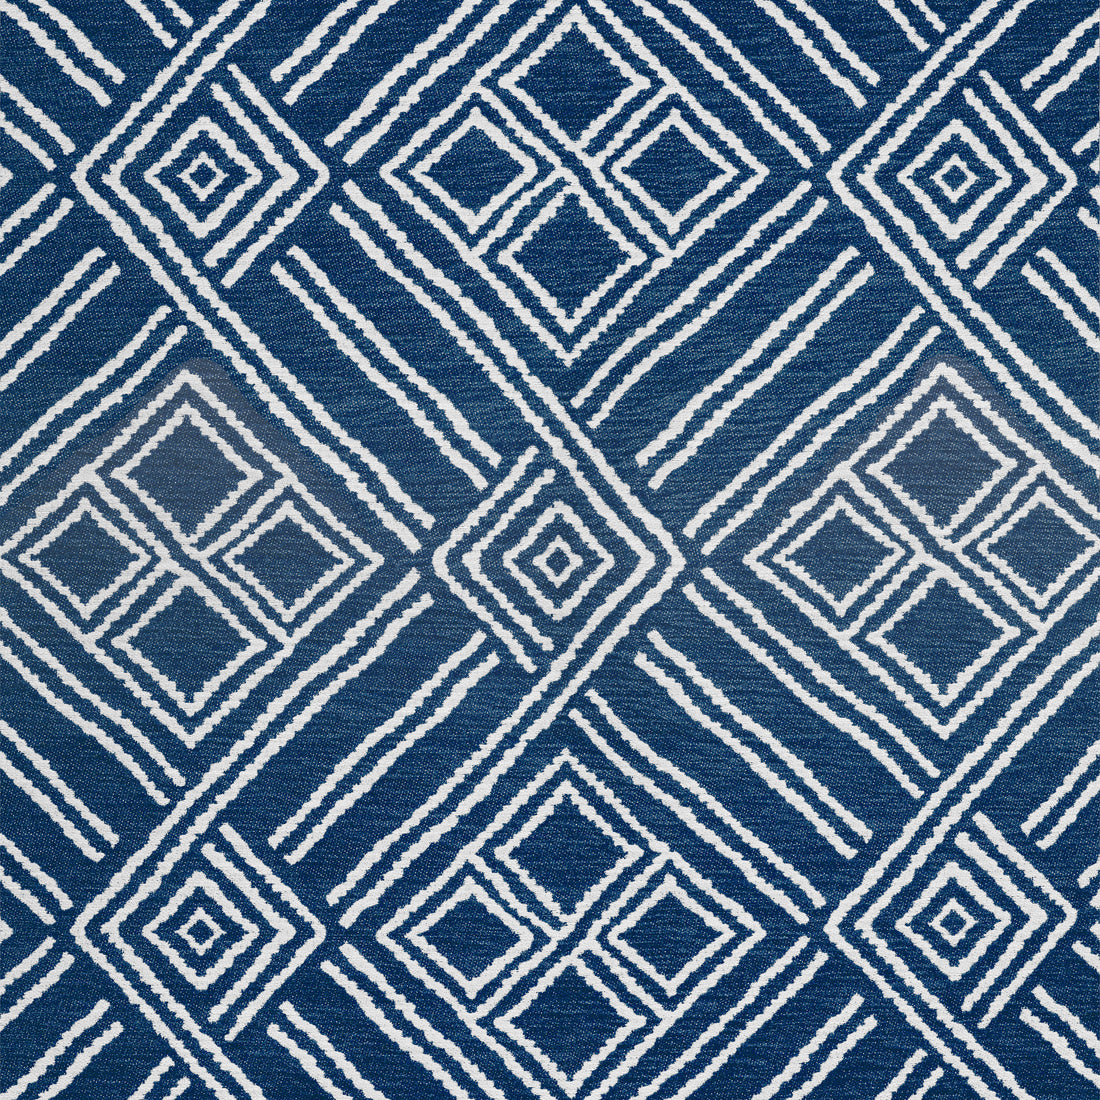 Terraza fabric in bermuda color - pattern number W8608 - by Thibaut in the Villa collection